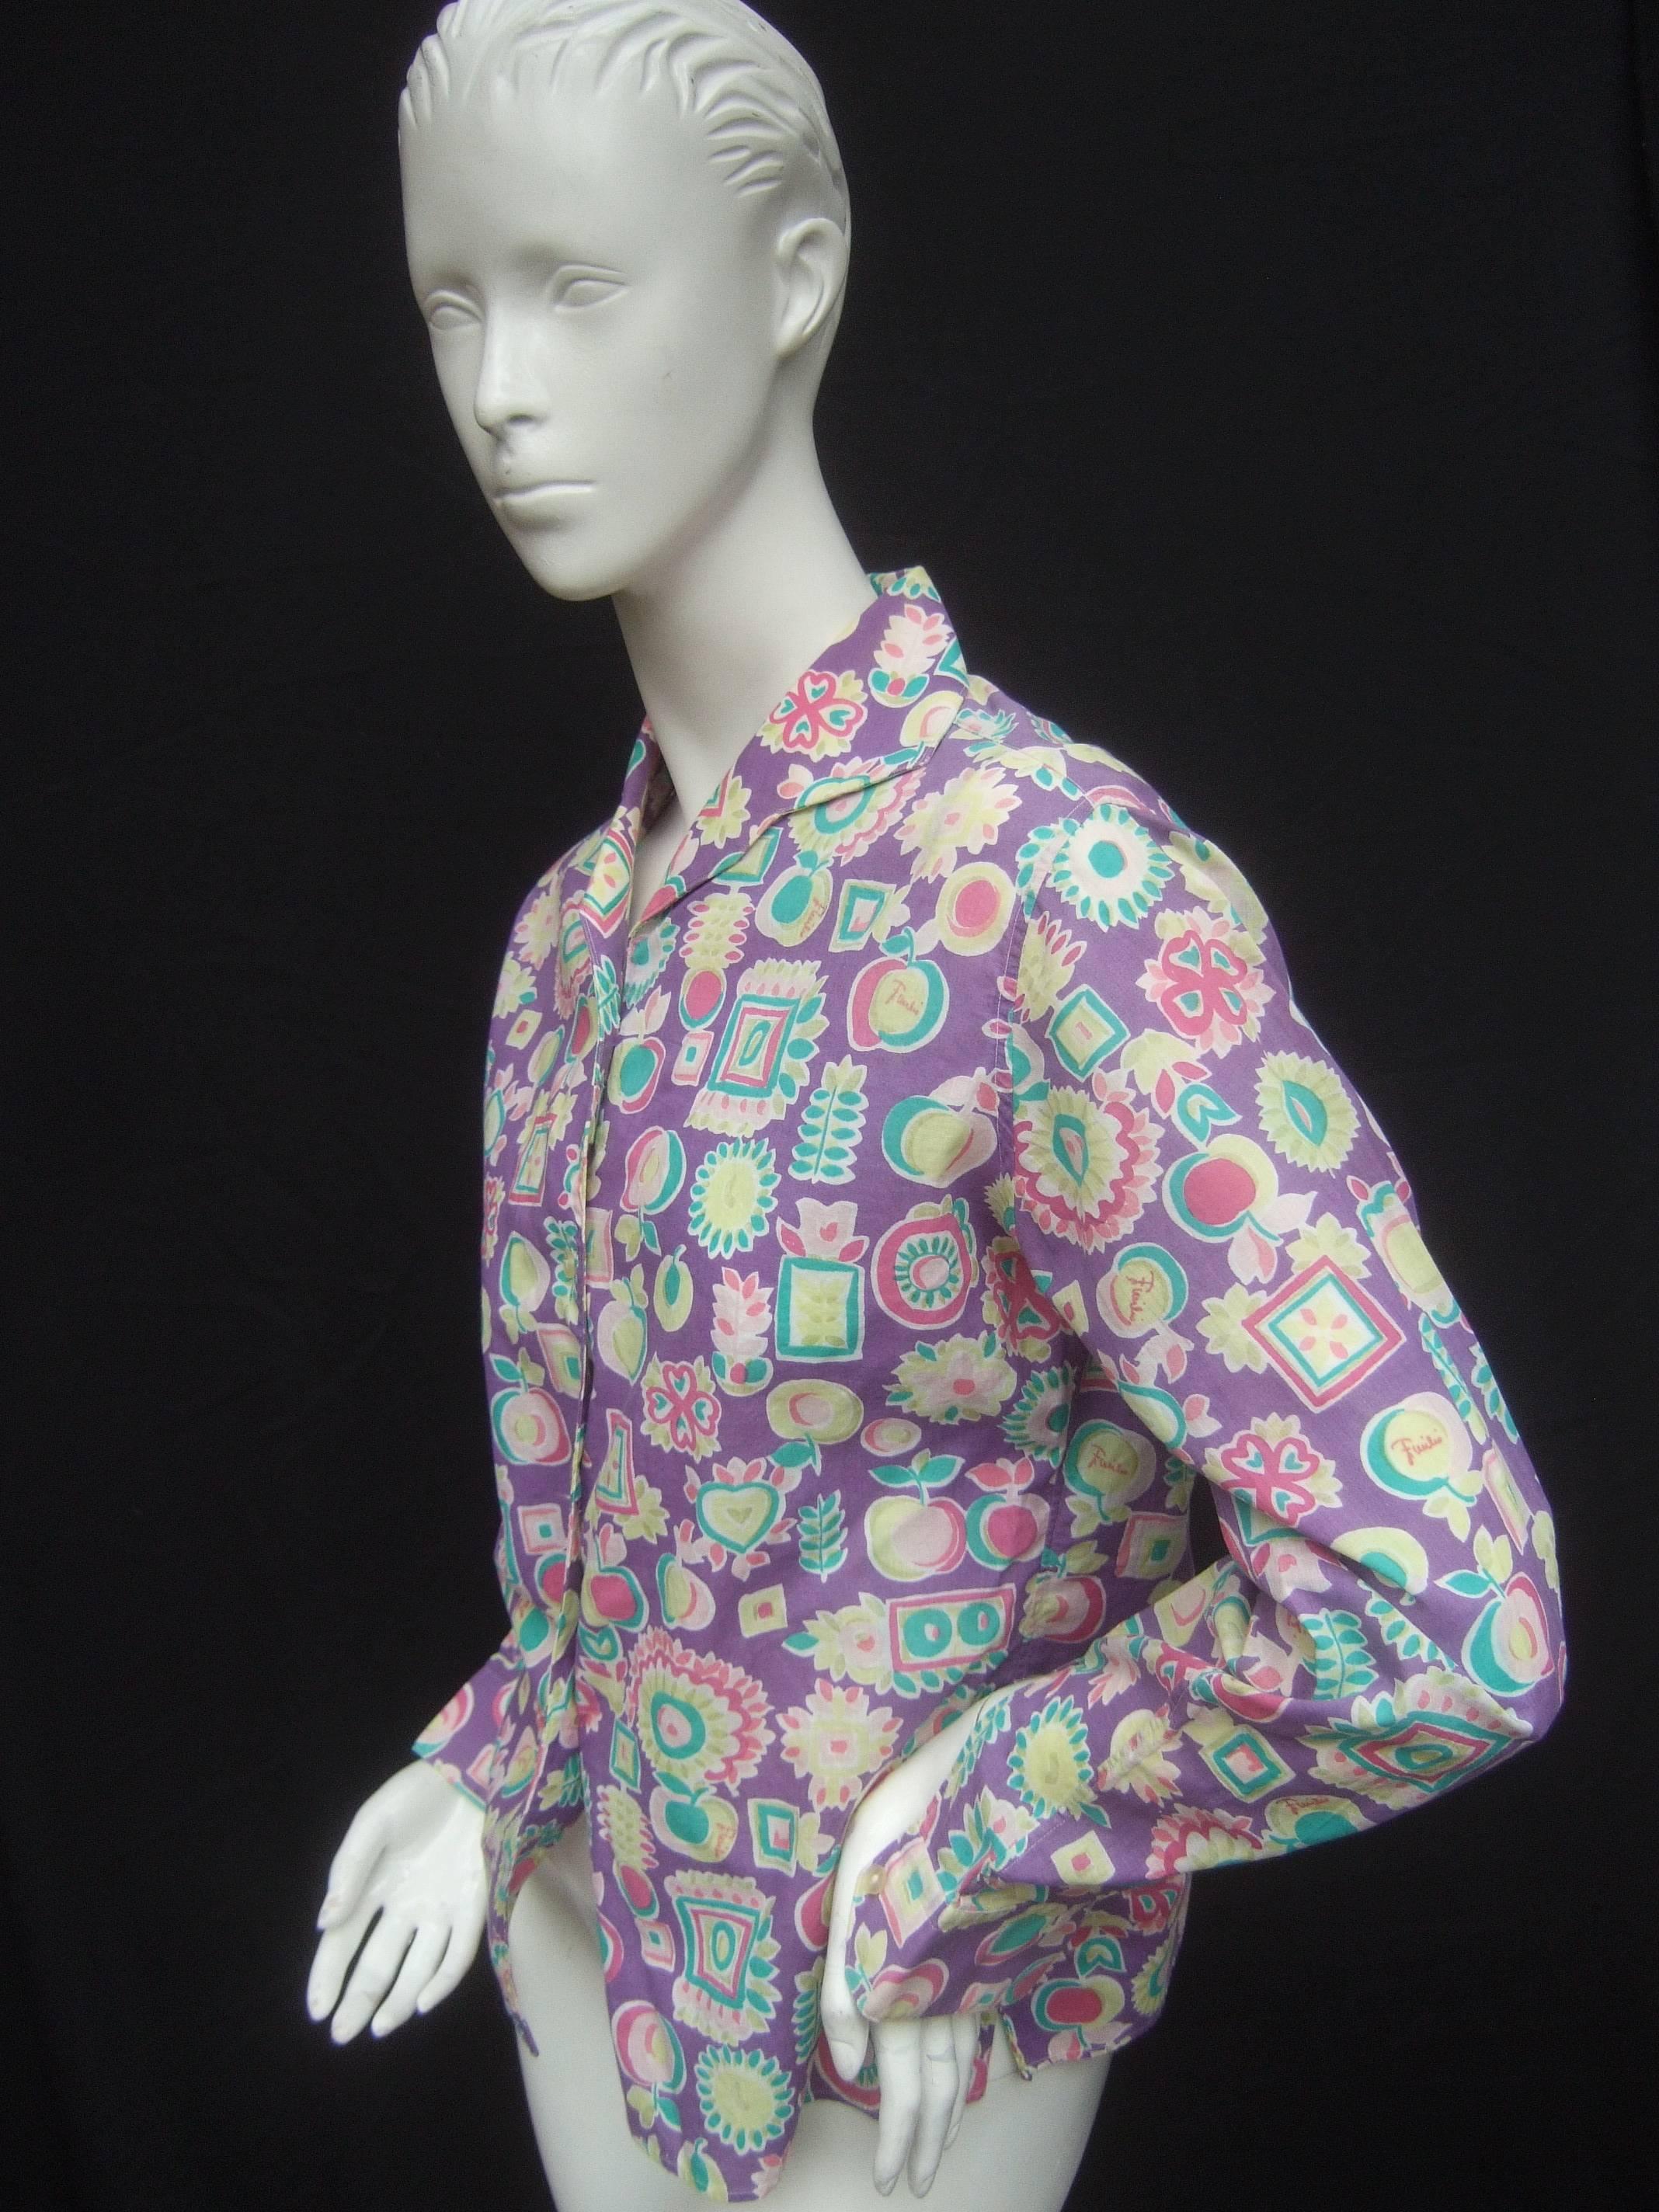 Emilio Pucci Cotton Pastel Print Blouse Made in Italy c 1970 For Sale 3